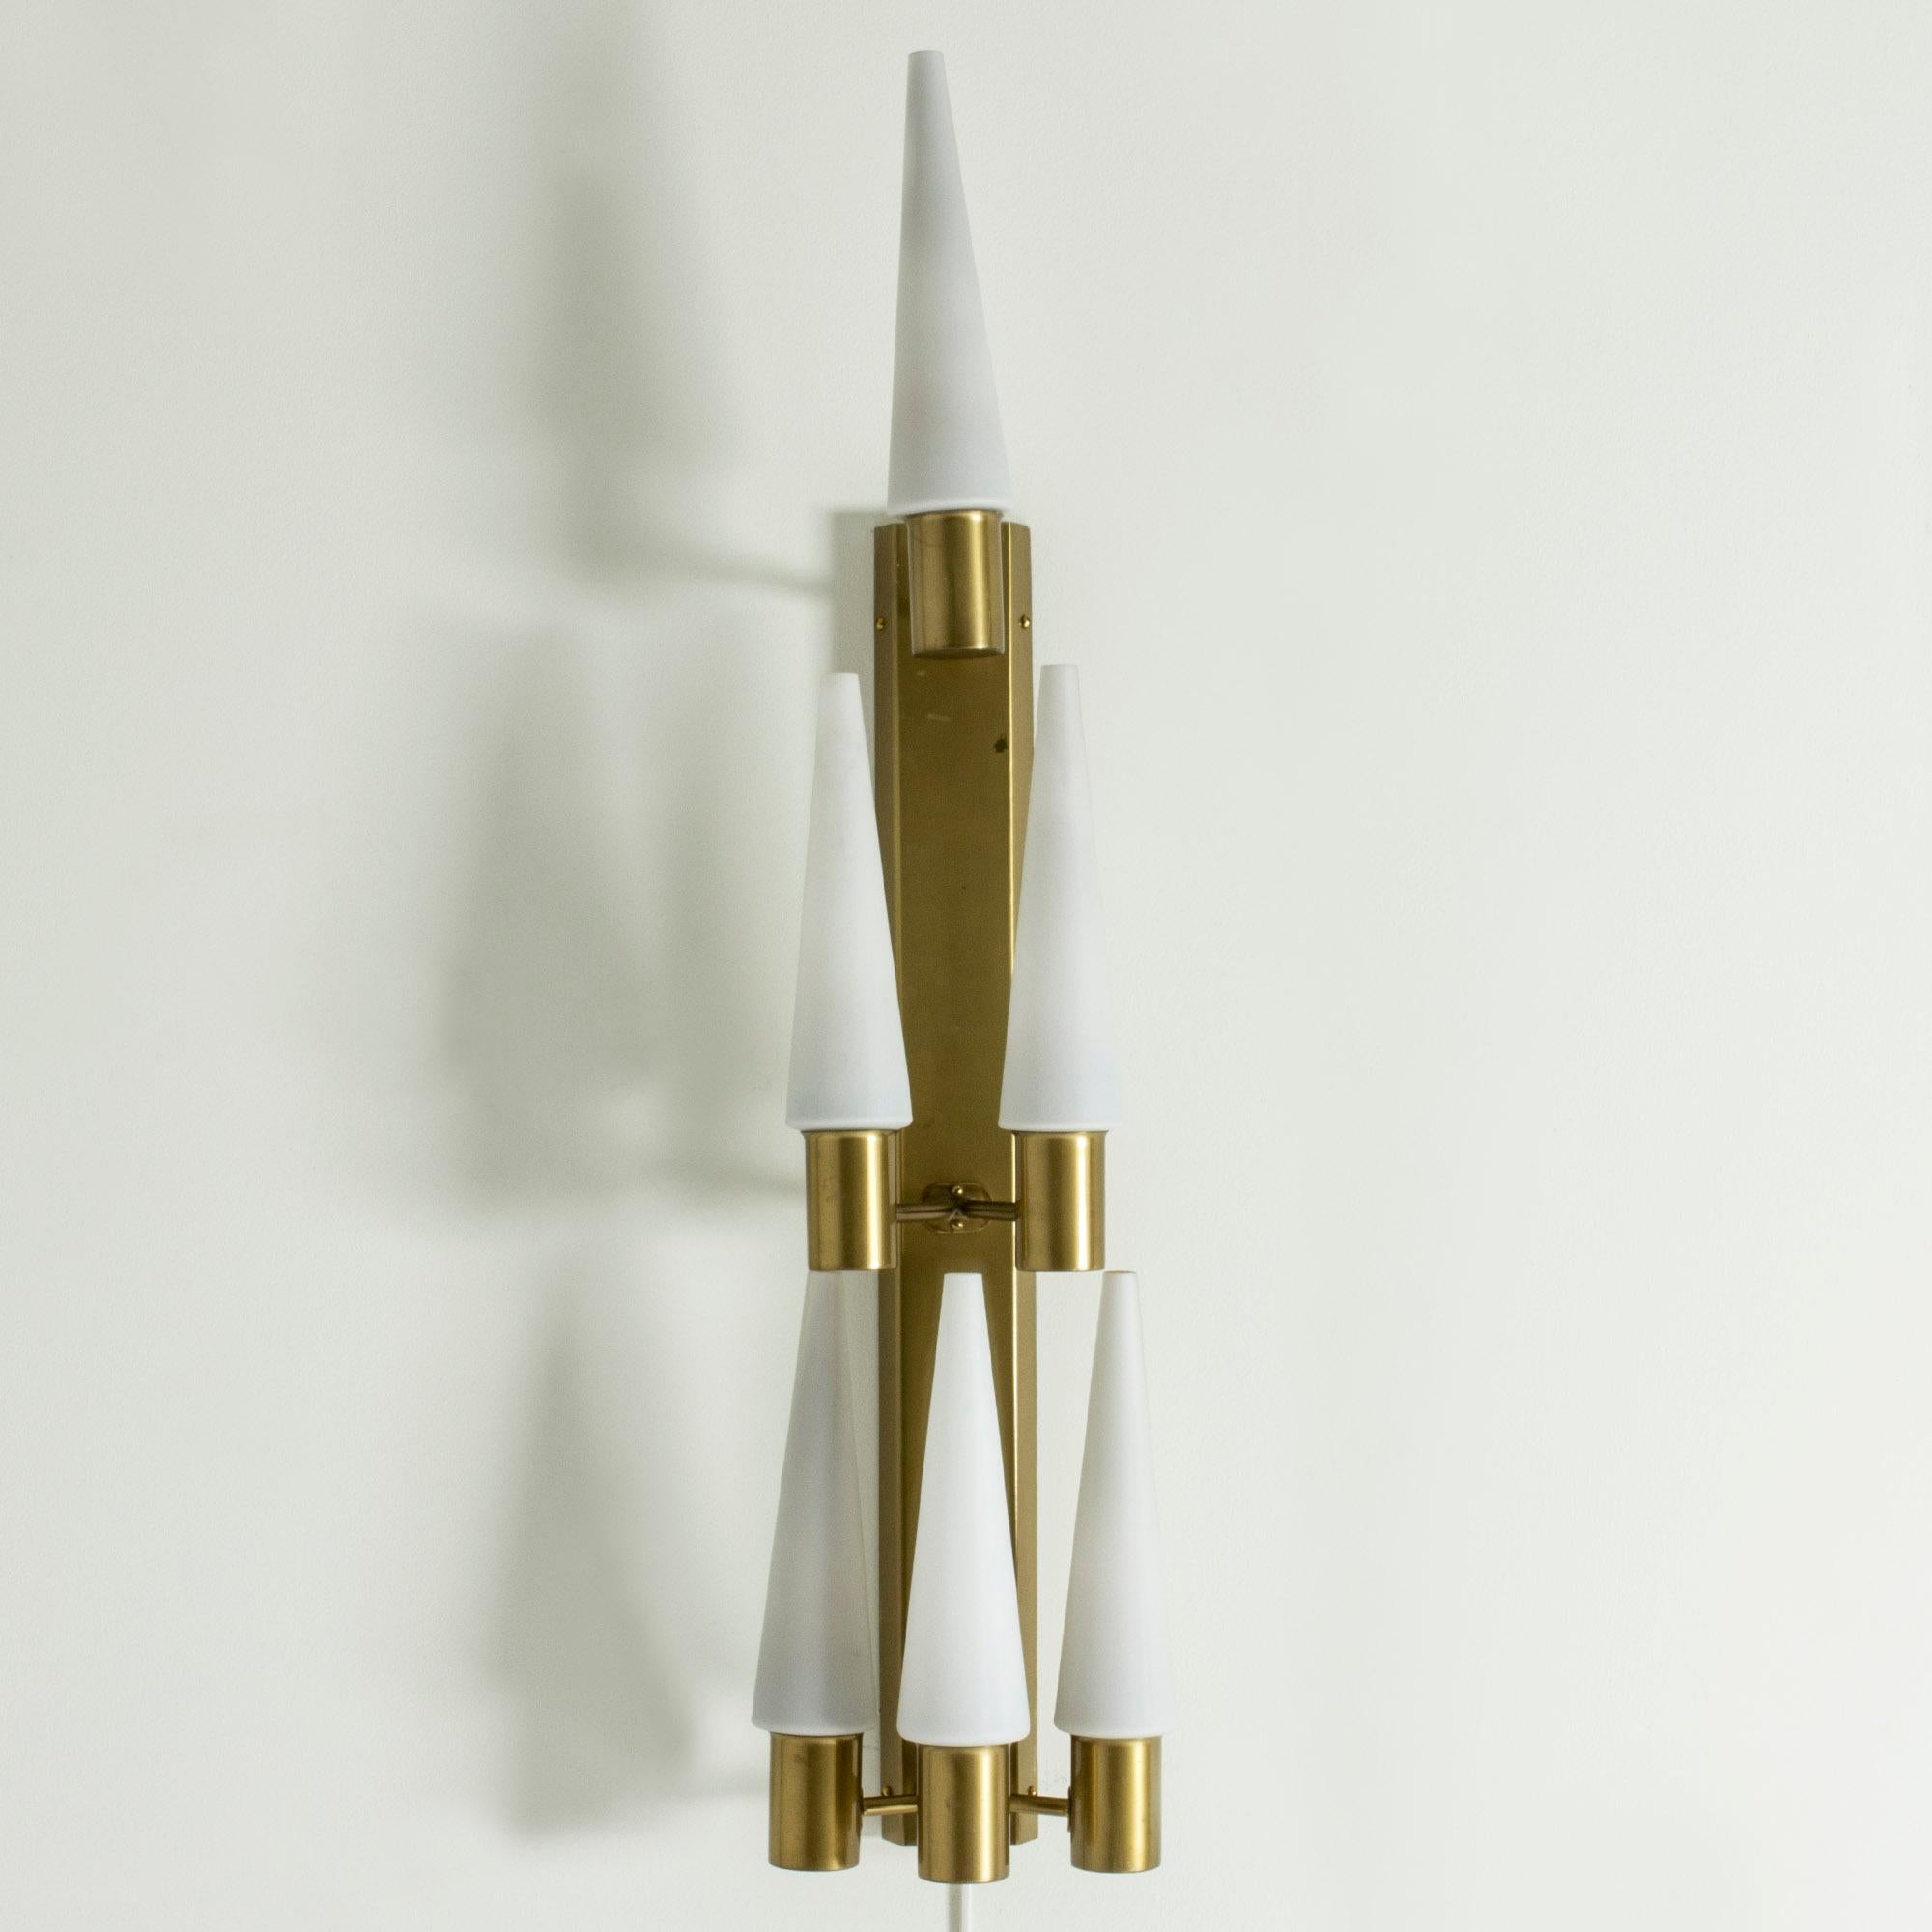 Amazing wall chandelier by Hans-Agne Jakobsson, made in brass with opaline glass shades. Slender, tapering shades in a very cool design. Beautiful, warm sheen when lit.